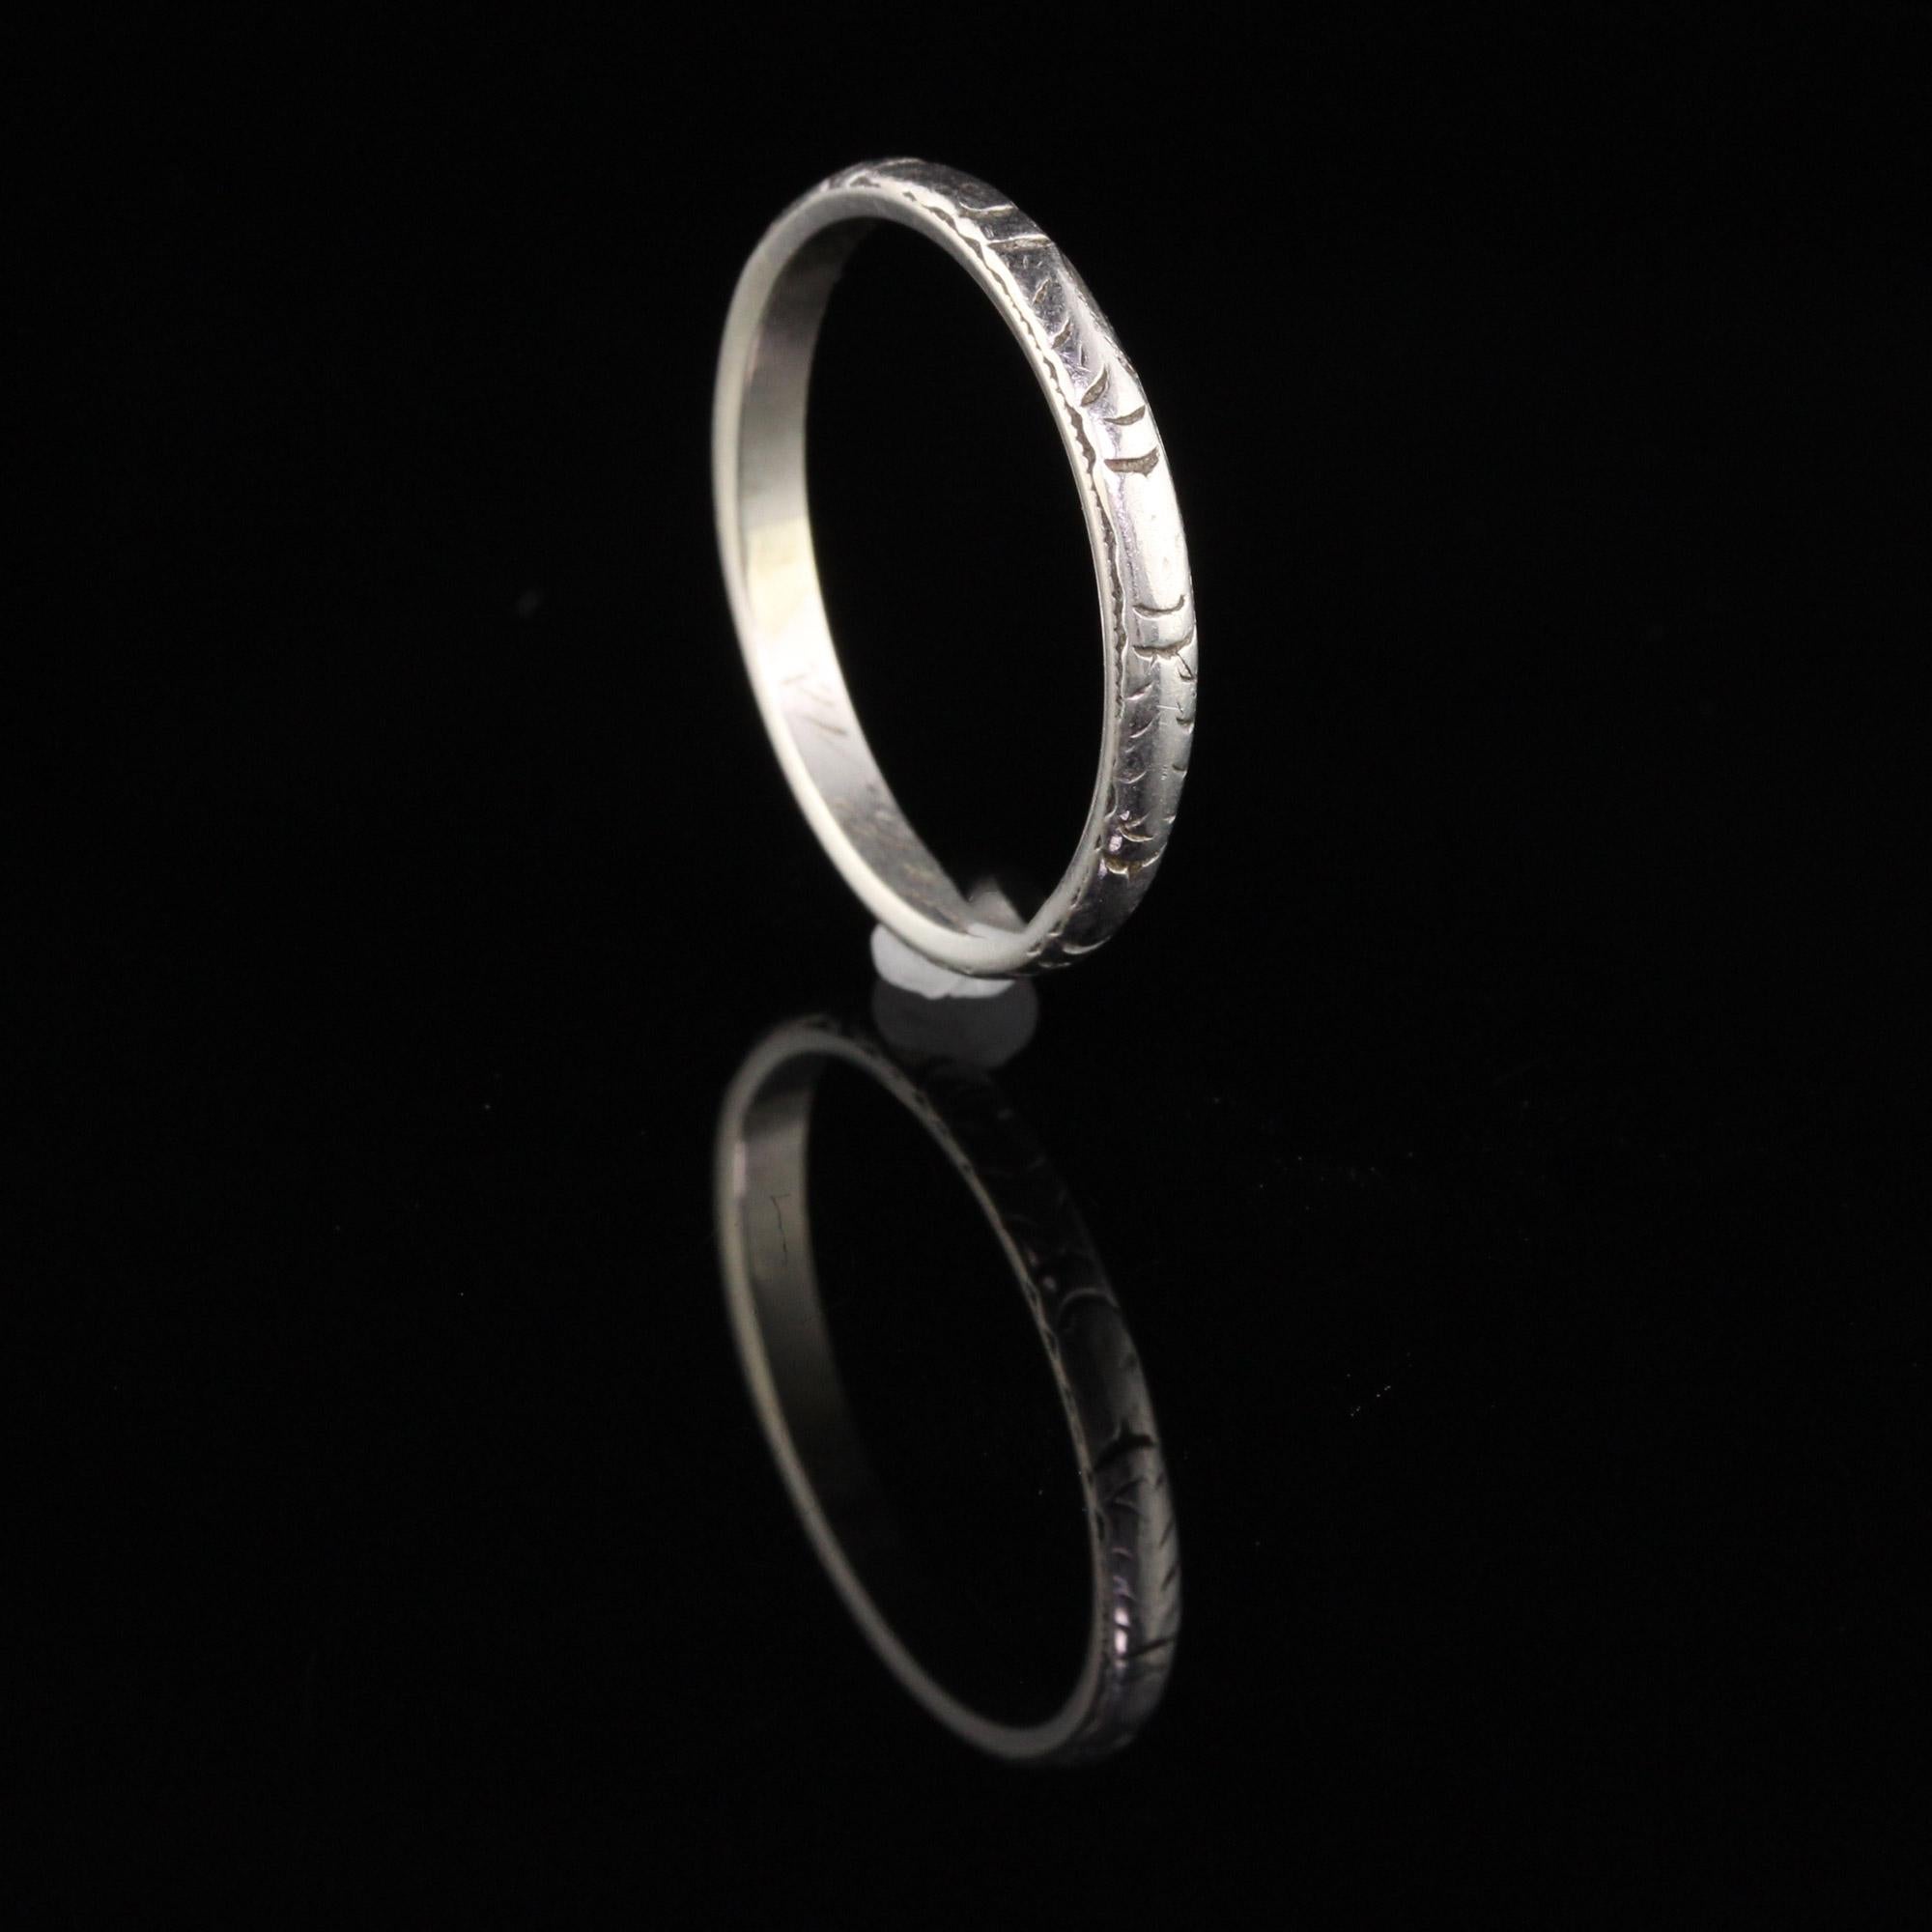 Antique Art Deco Platinum Engraved Wedding Band, circa 1927 In Good Condition For Sale In Great Neck, NY